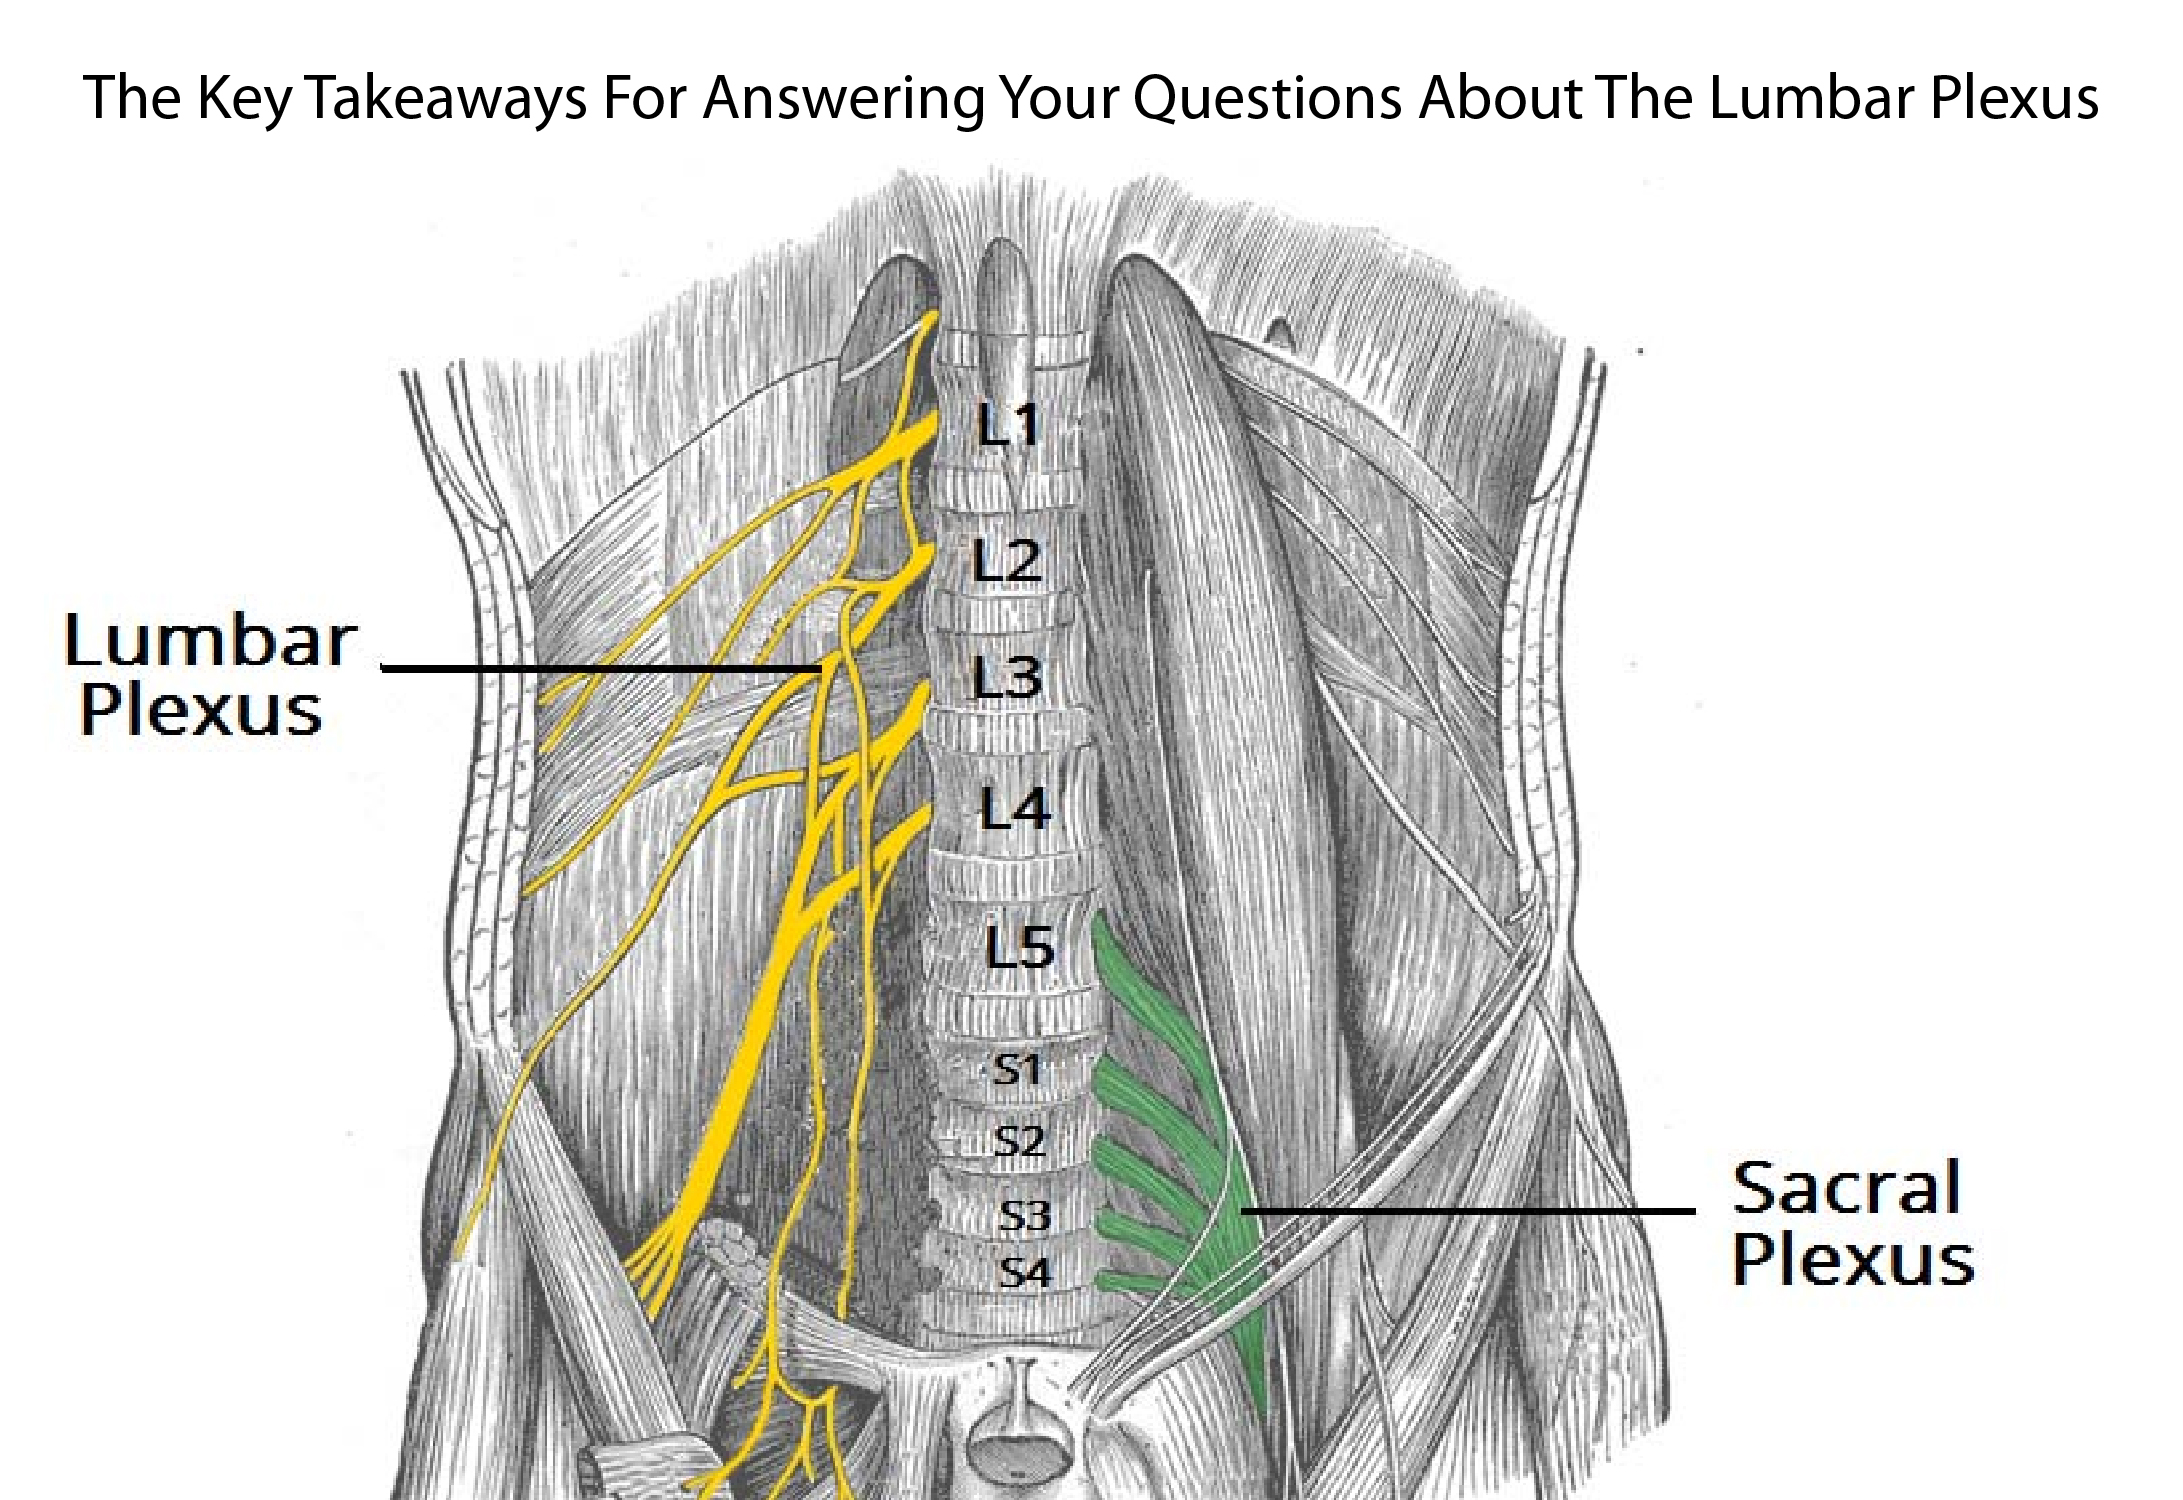 The Key Takeaways For Answering Your Questions About The Lumbar Plexus